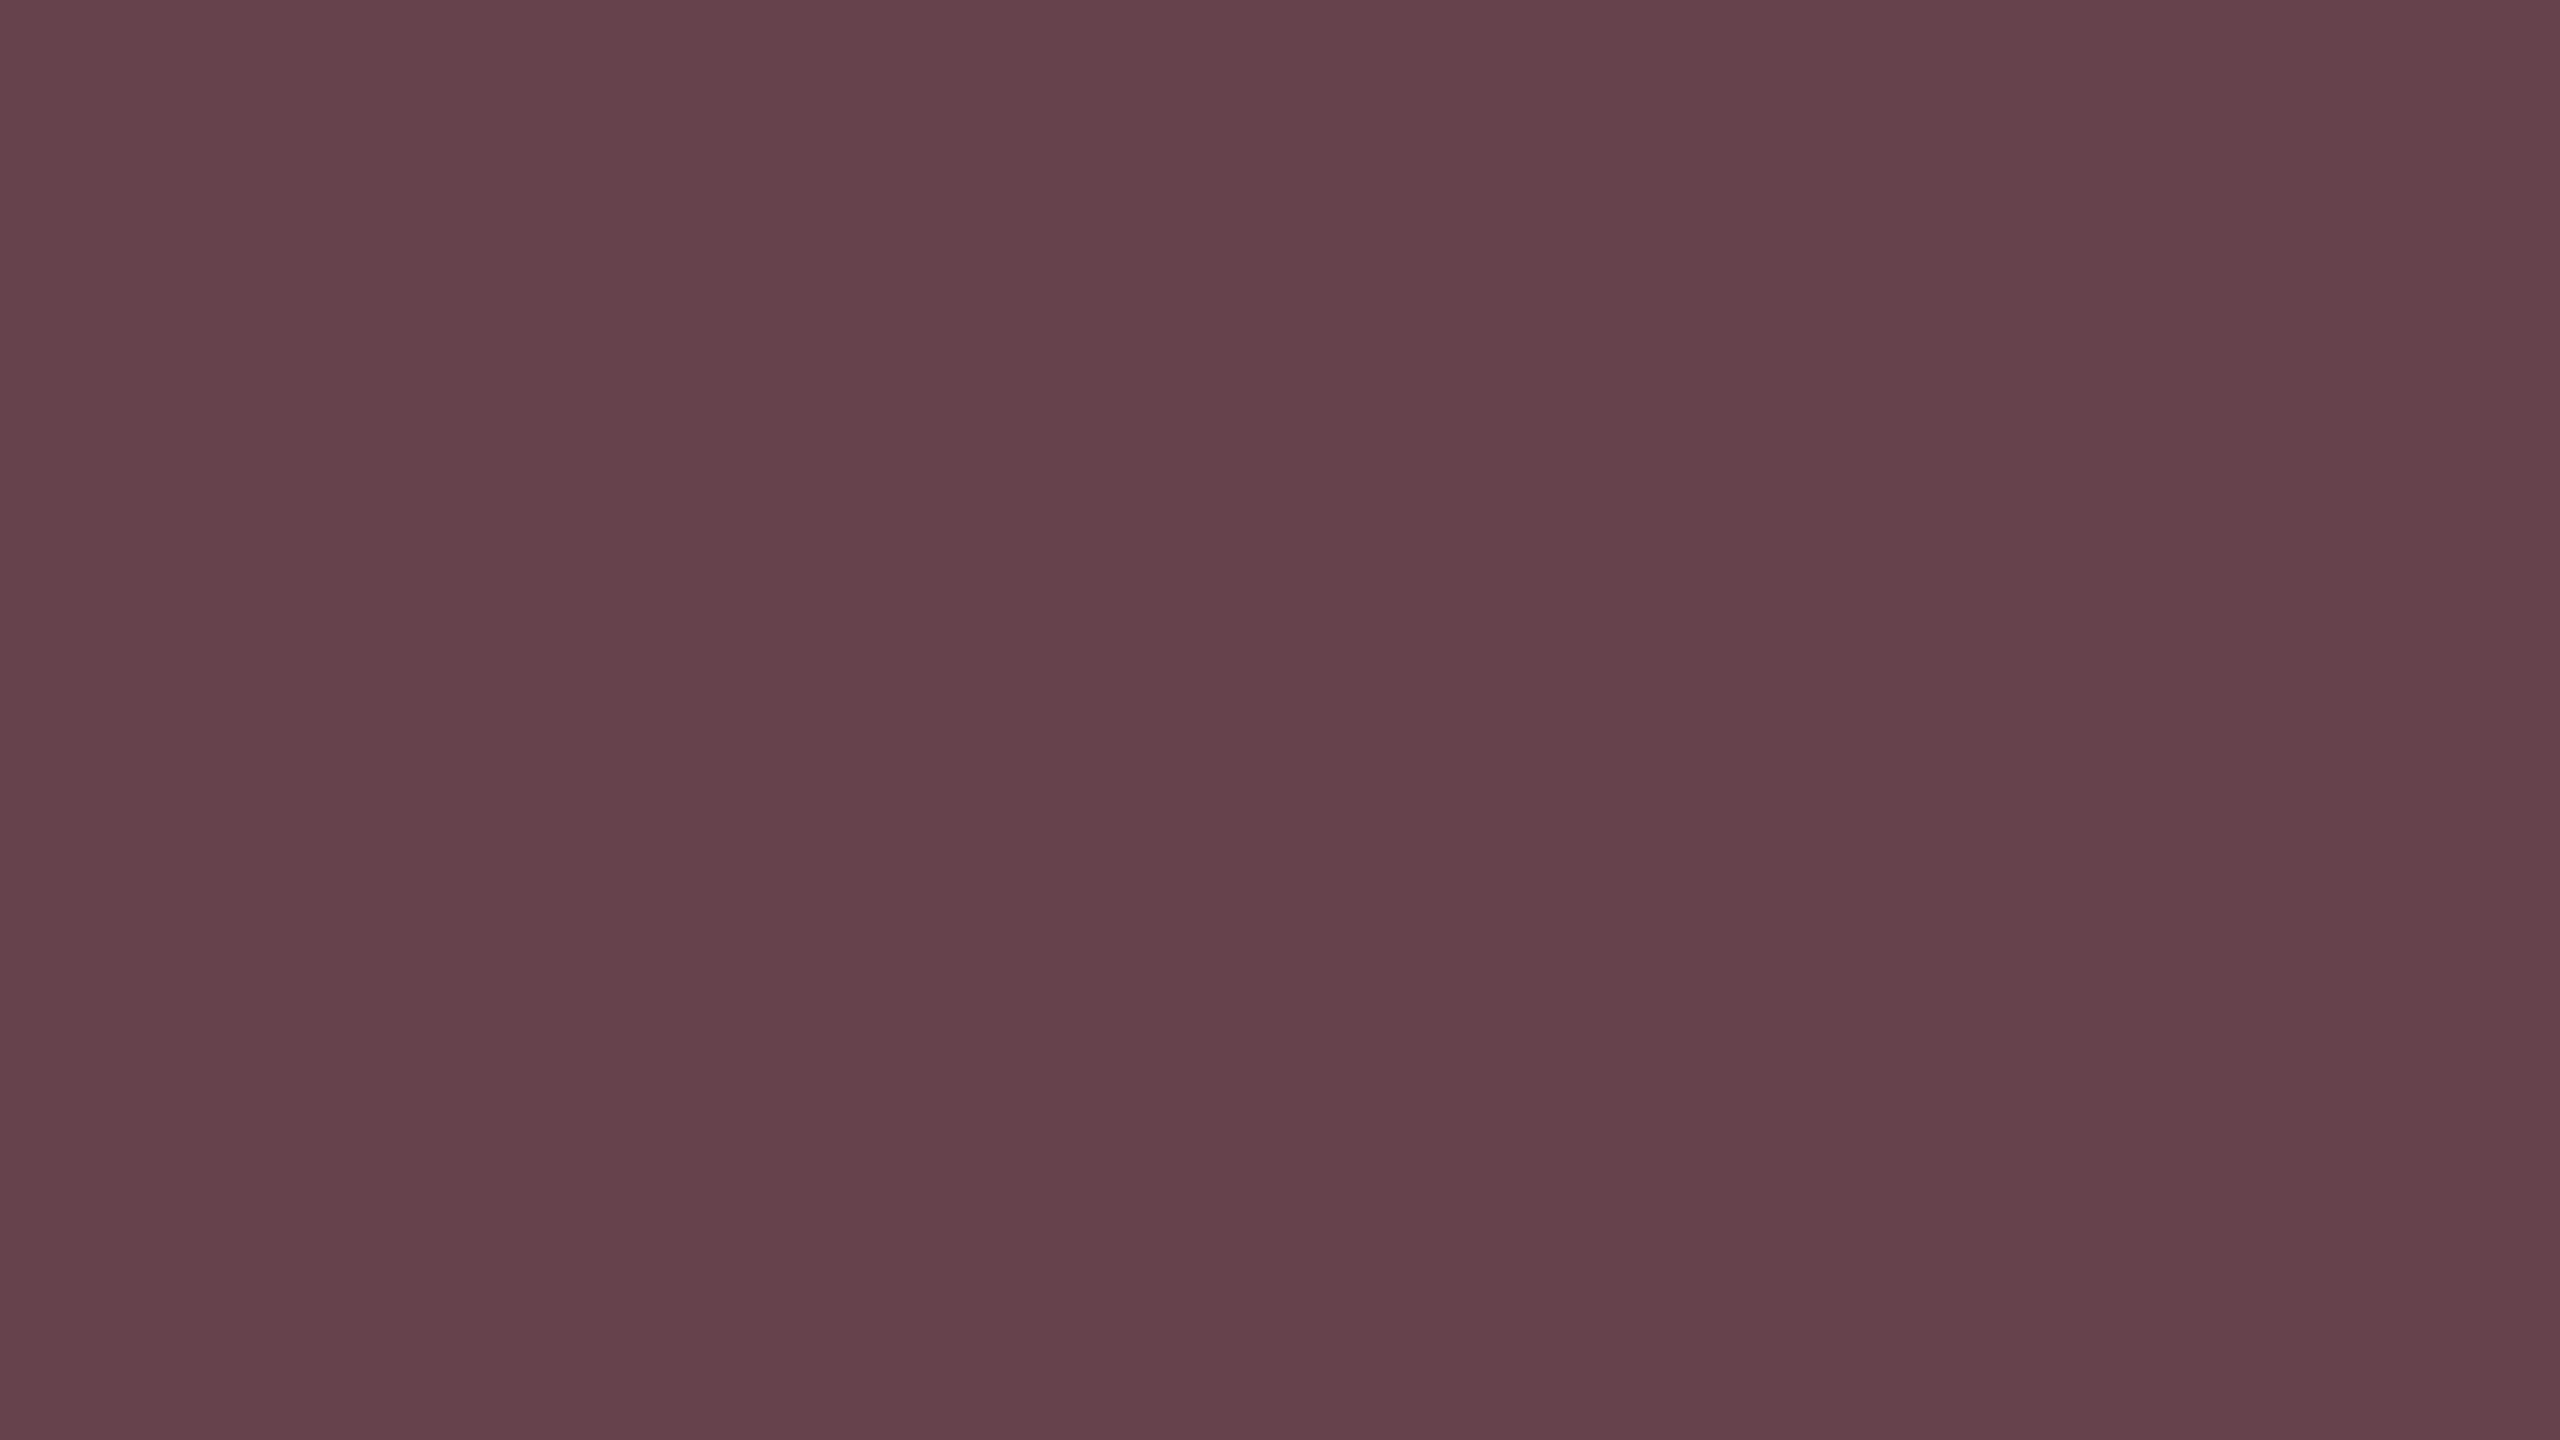 2560x1440 Deep Tuscan Red Solid Color Background